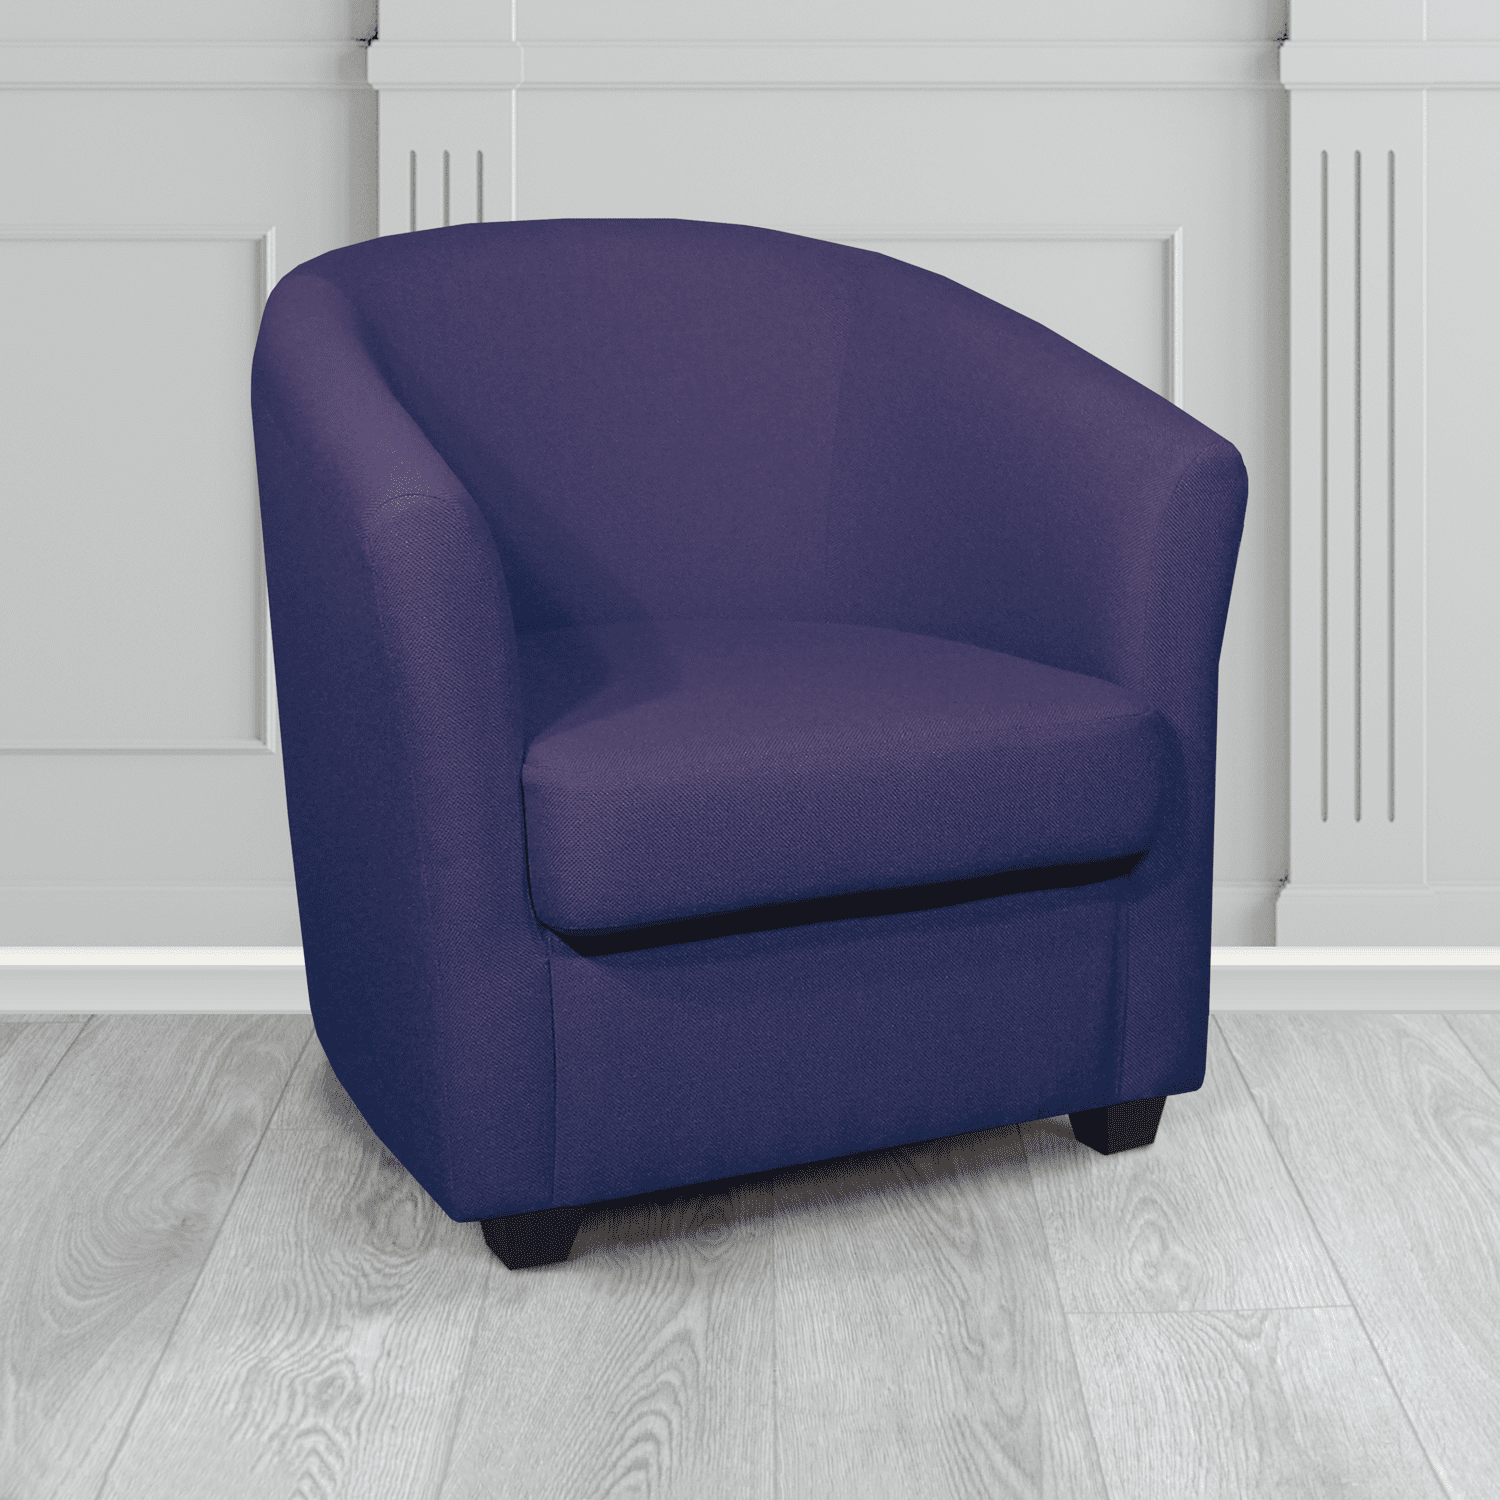 Cannes Tub Chair in Mainline Plus Prudence IF250 Crib 5 Fabric - The Tub Chair Shop